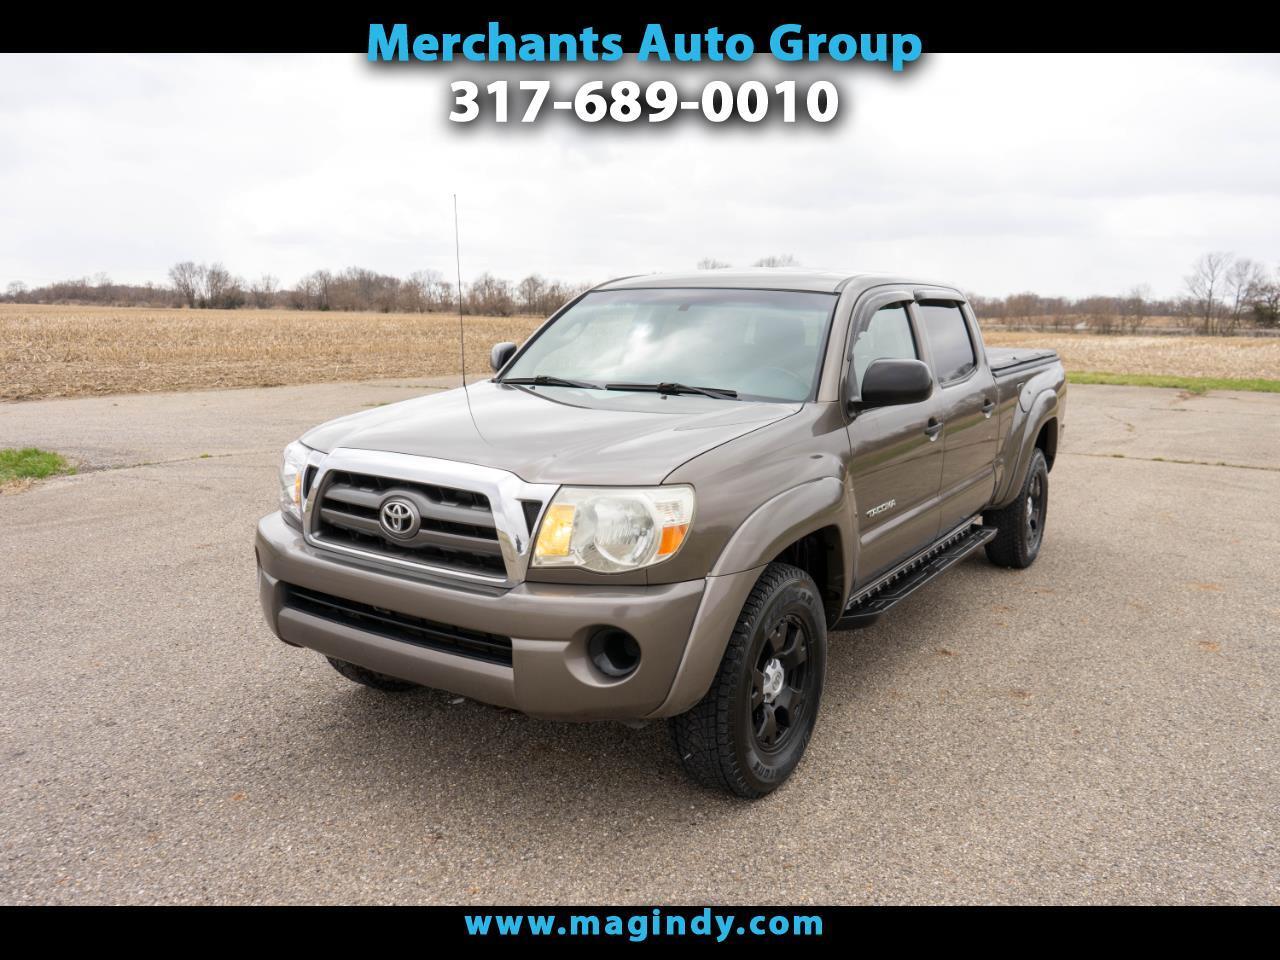 2009 Toyota Tacoma for sale in Cicero, IN